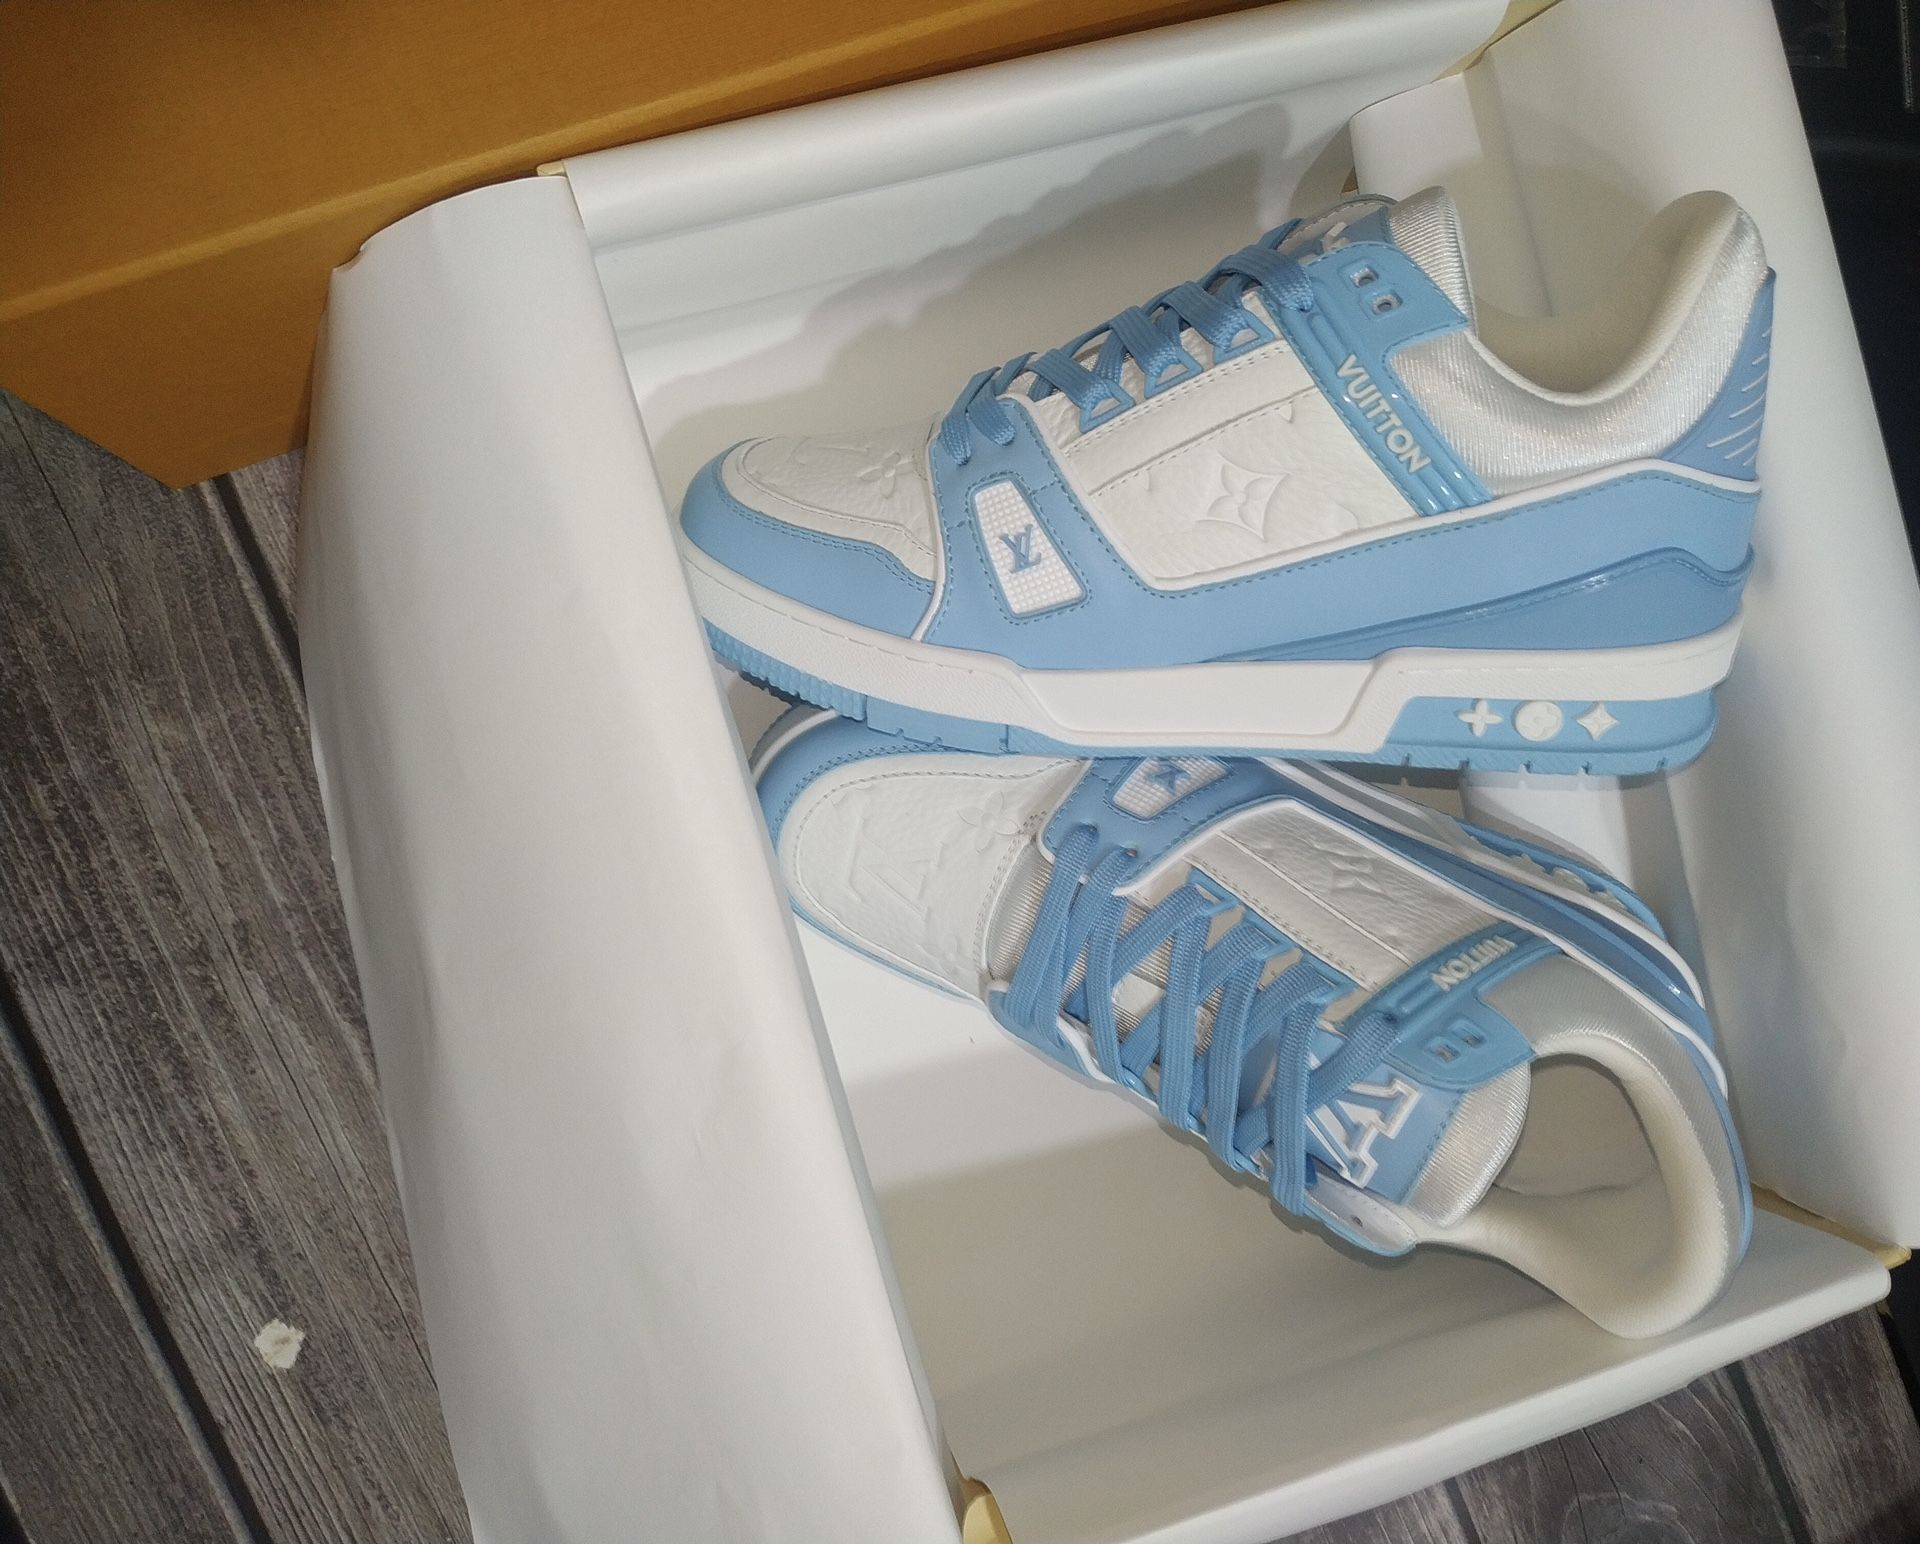 LV Trainers In stock shoes for Sale in The Bronx, NY - OfferUp